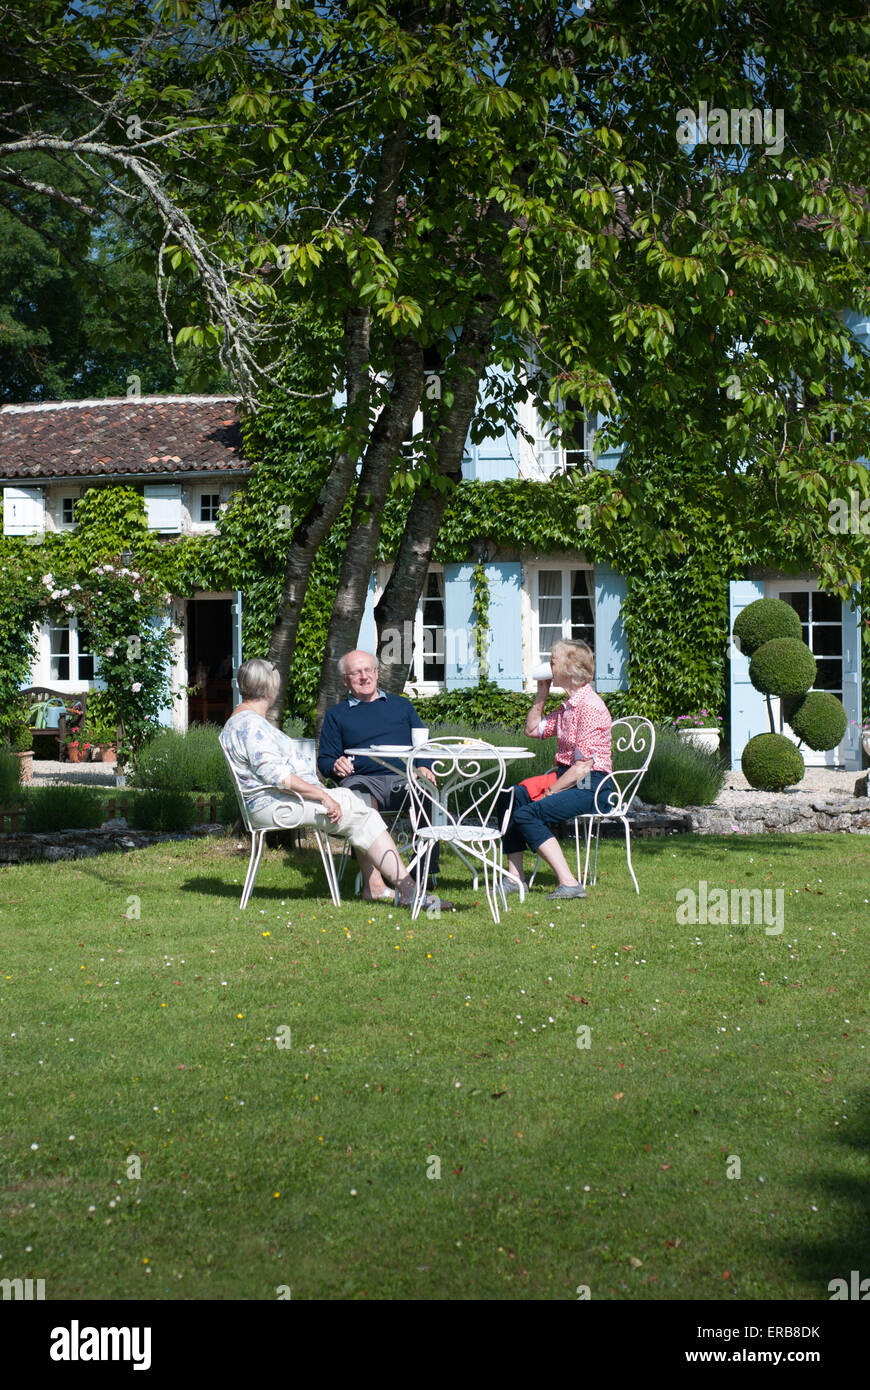 Diners on the lawn of a french country house Stock Photo